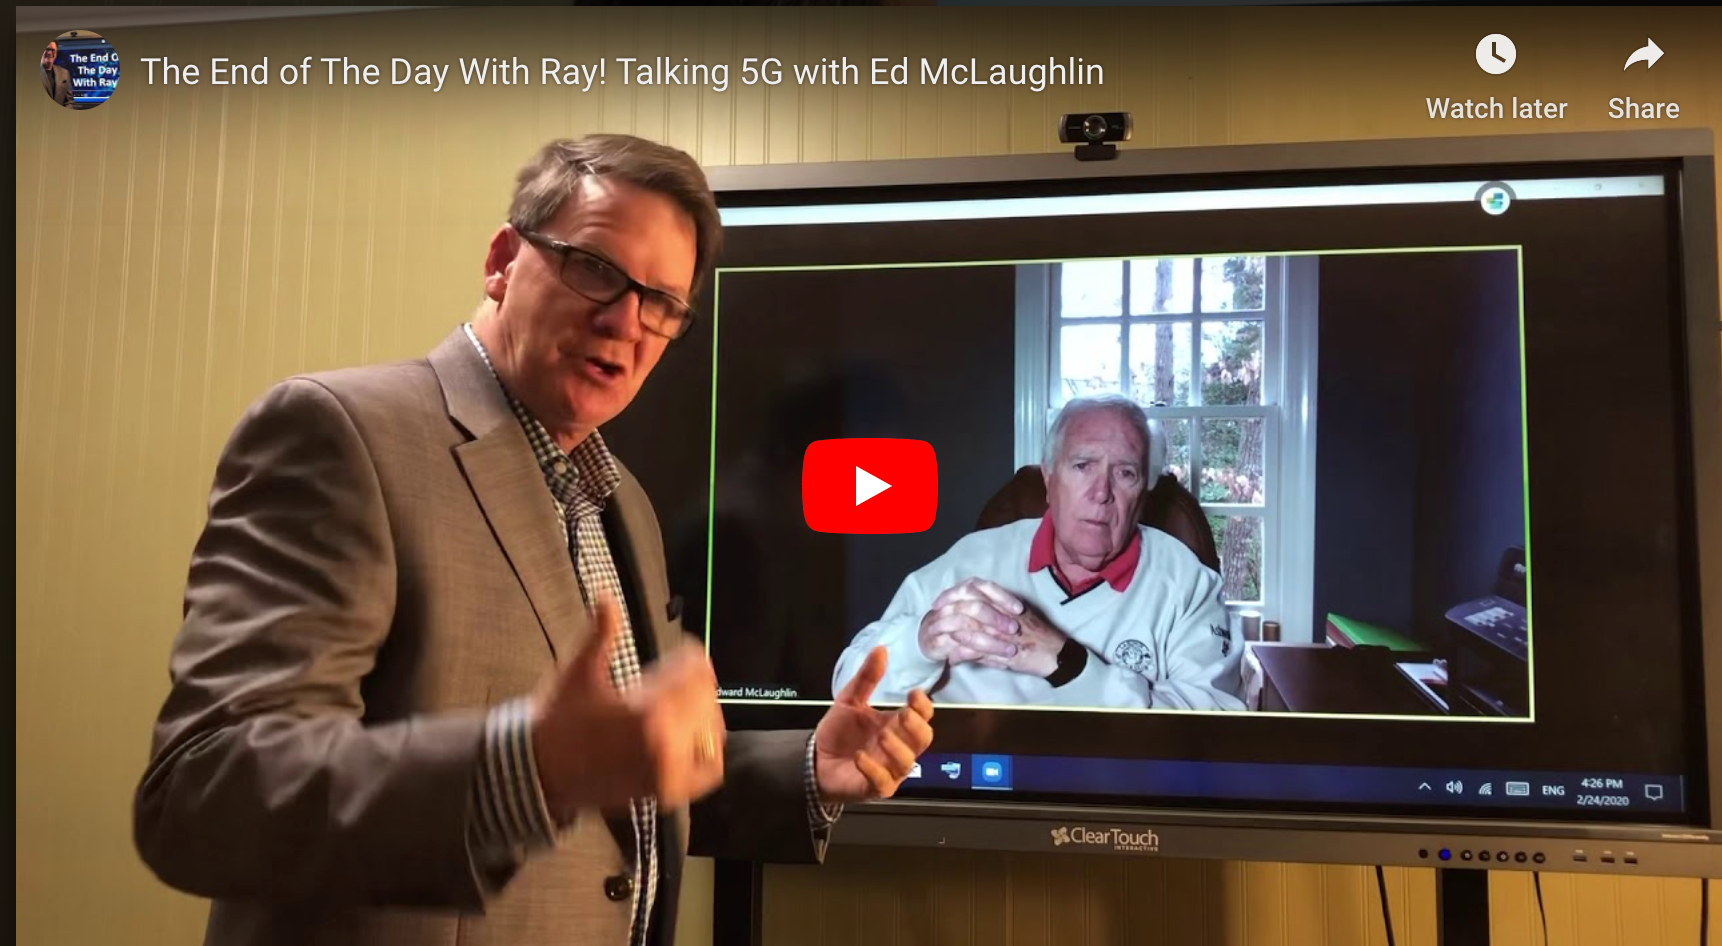 The End of The Day With Ray! Talking 5G with Ed McLaughlin